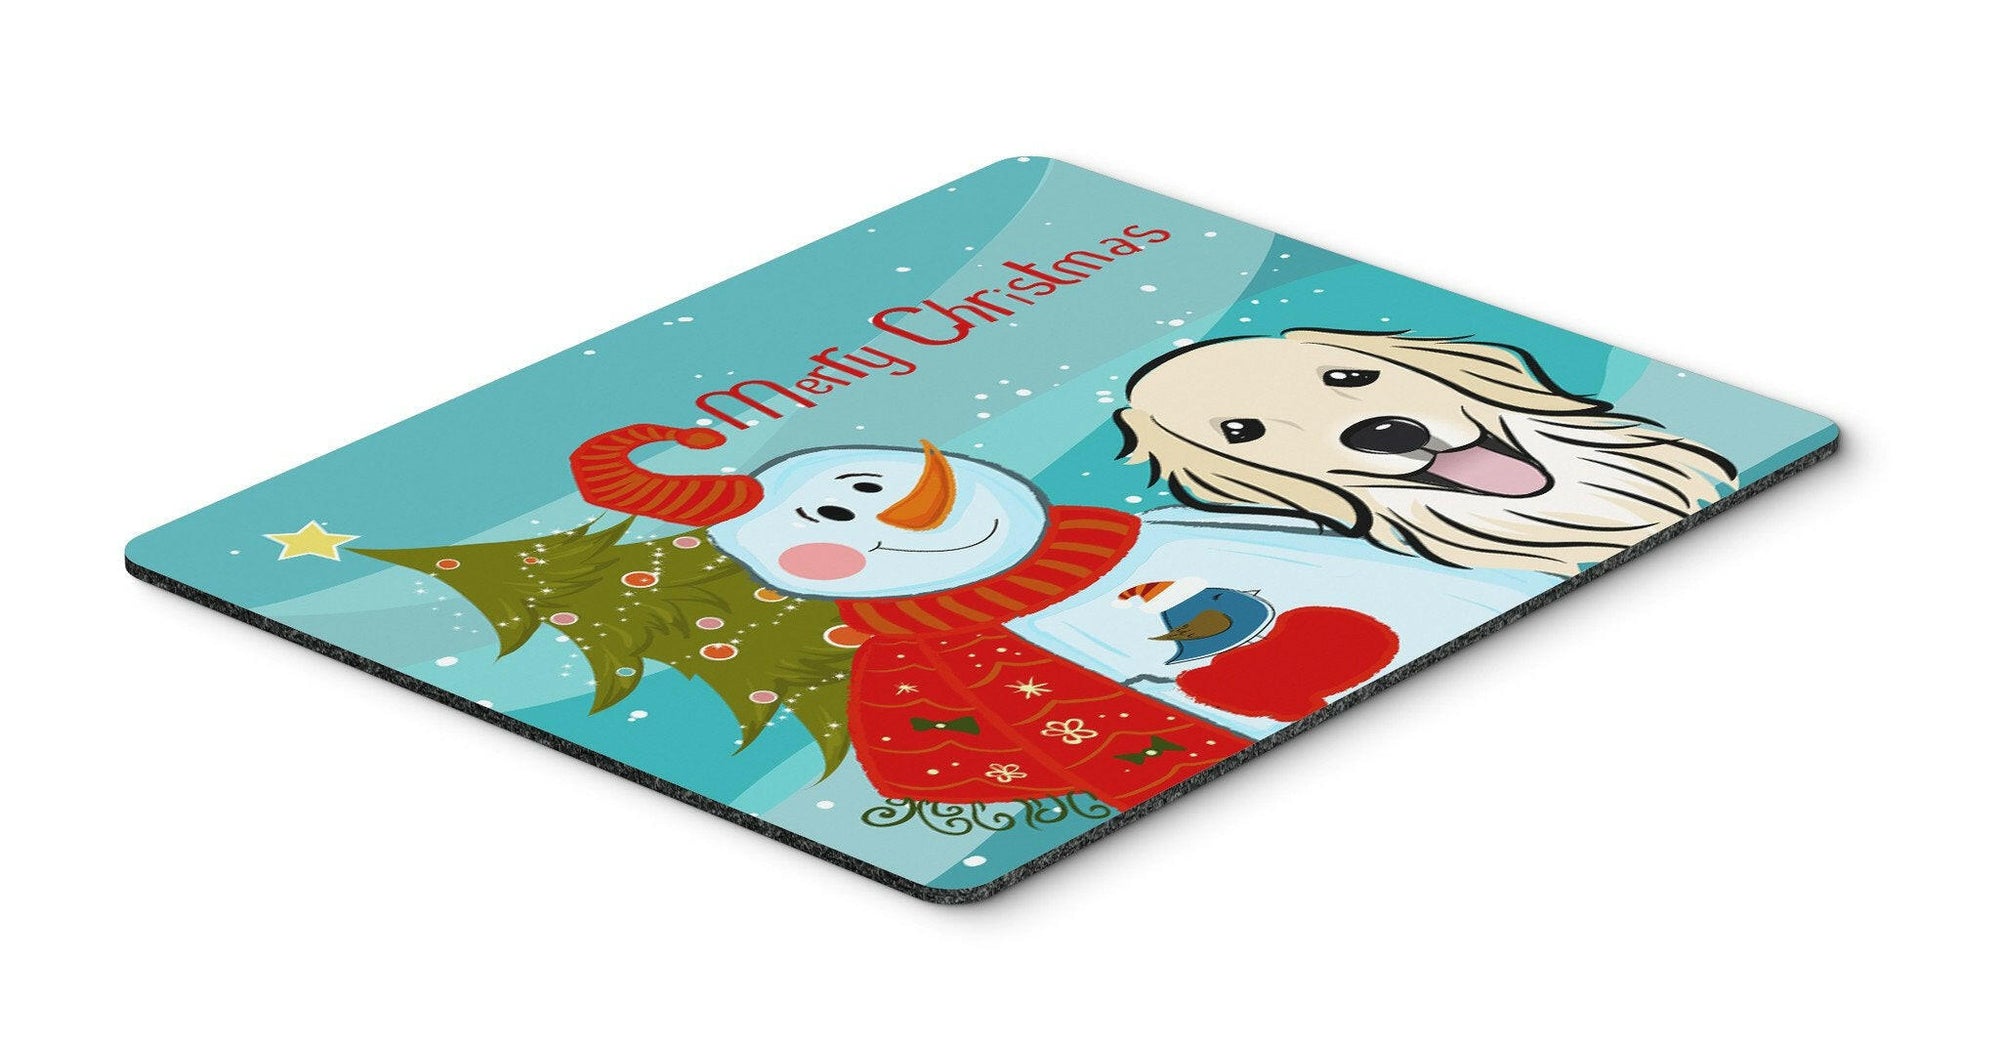 Snowman with Golden Retriever Mouse Pad, Hot Pad or Trivet BB1825MP by Caroline's Treasures